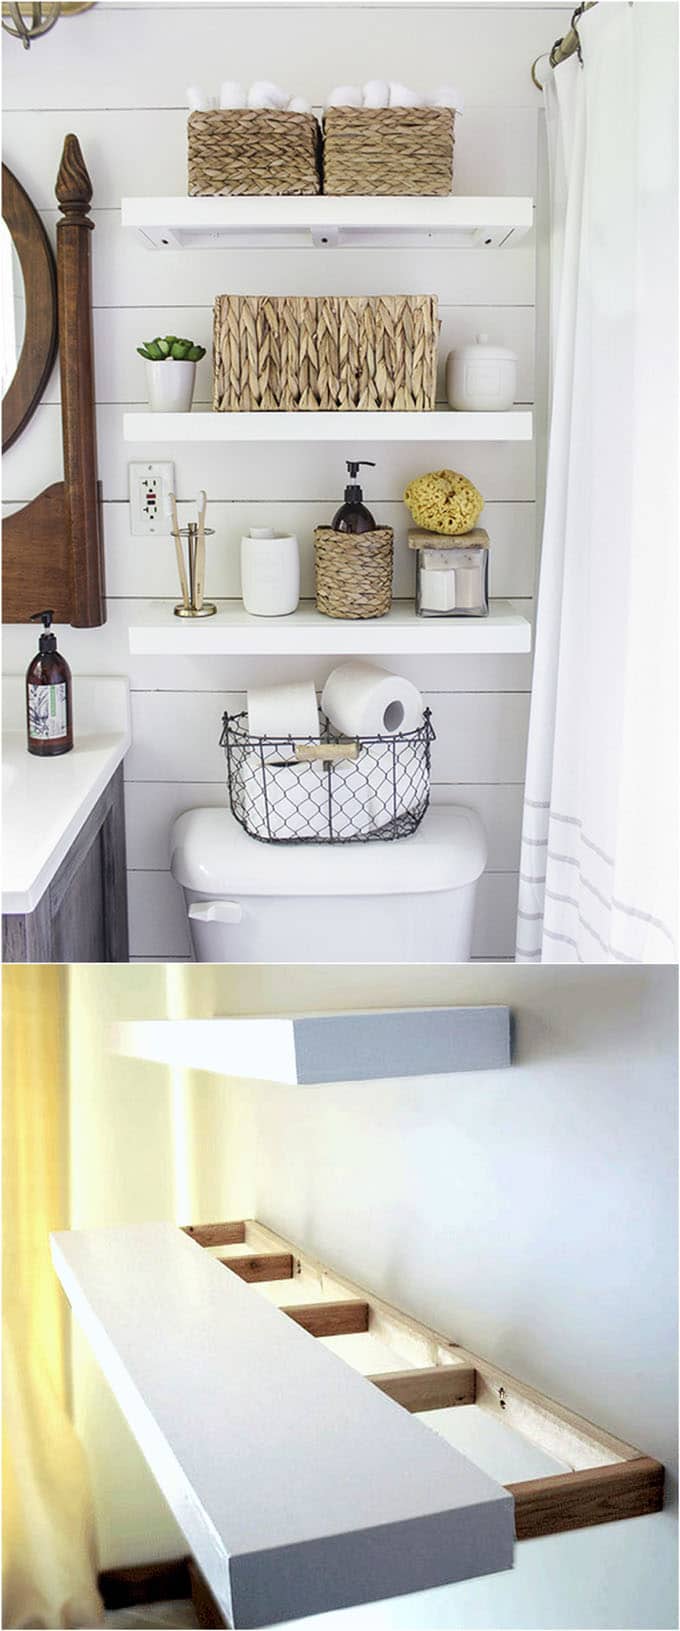 16 Easy and Stylish DIY Floating Shelves & Wall Shelves - A Piece Of Rainbow